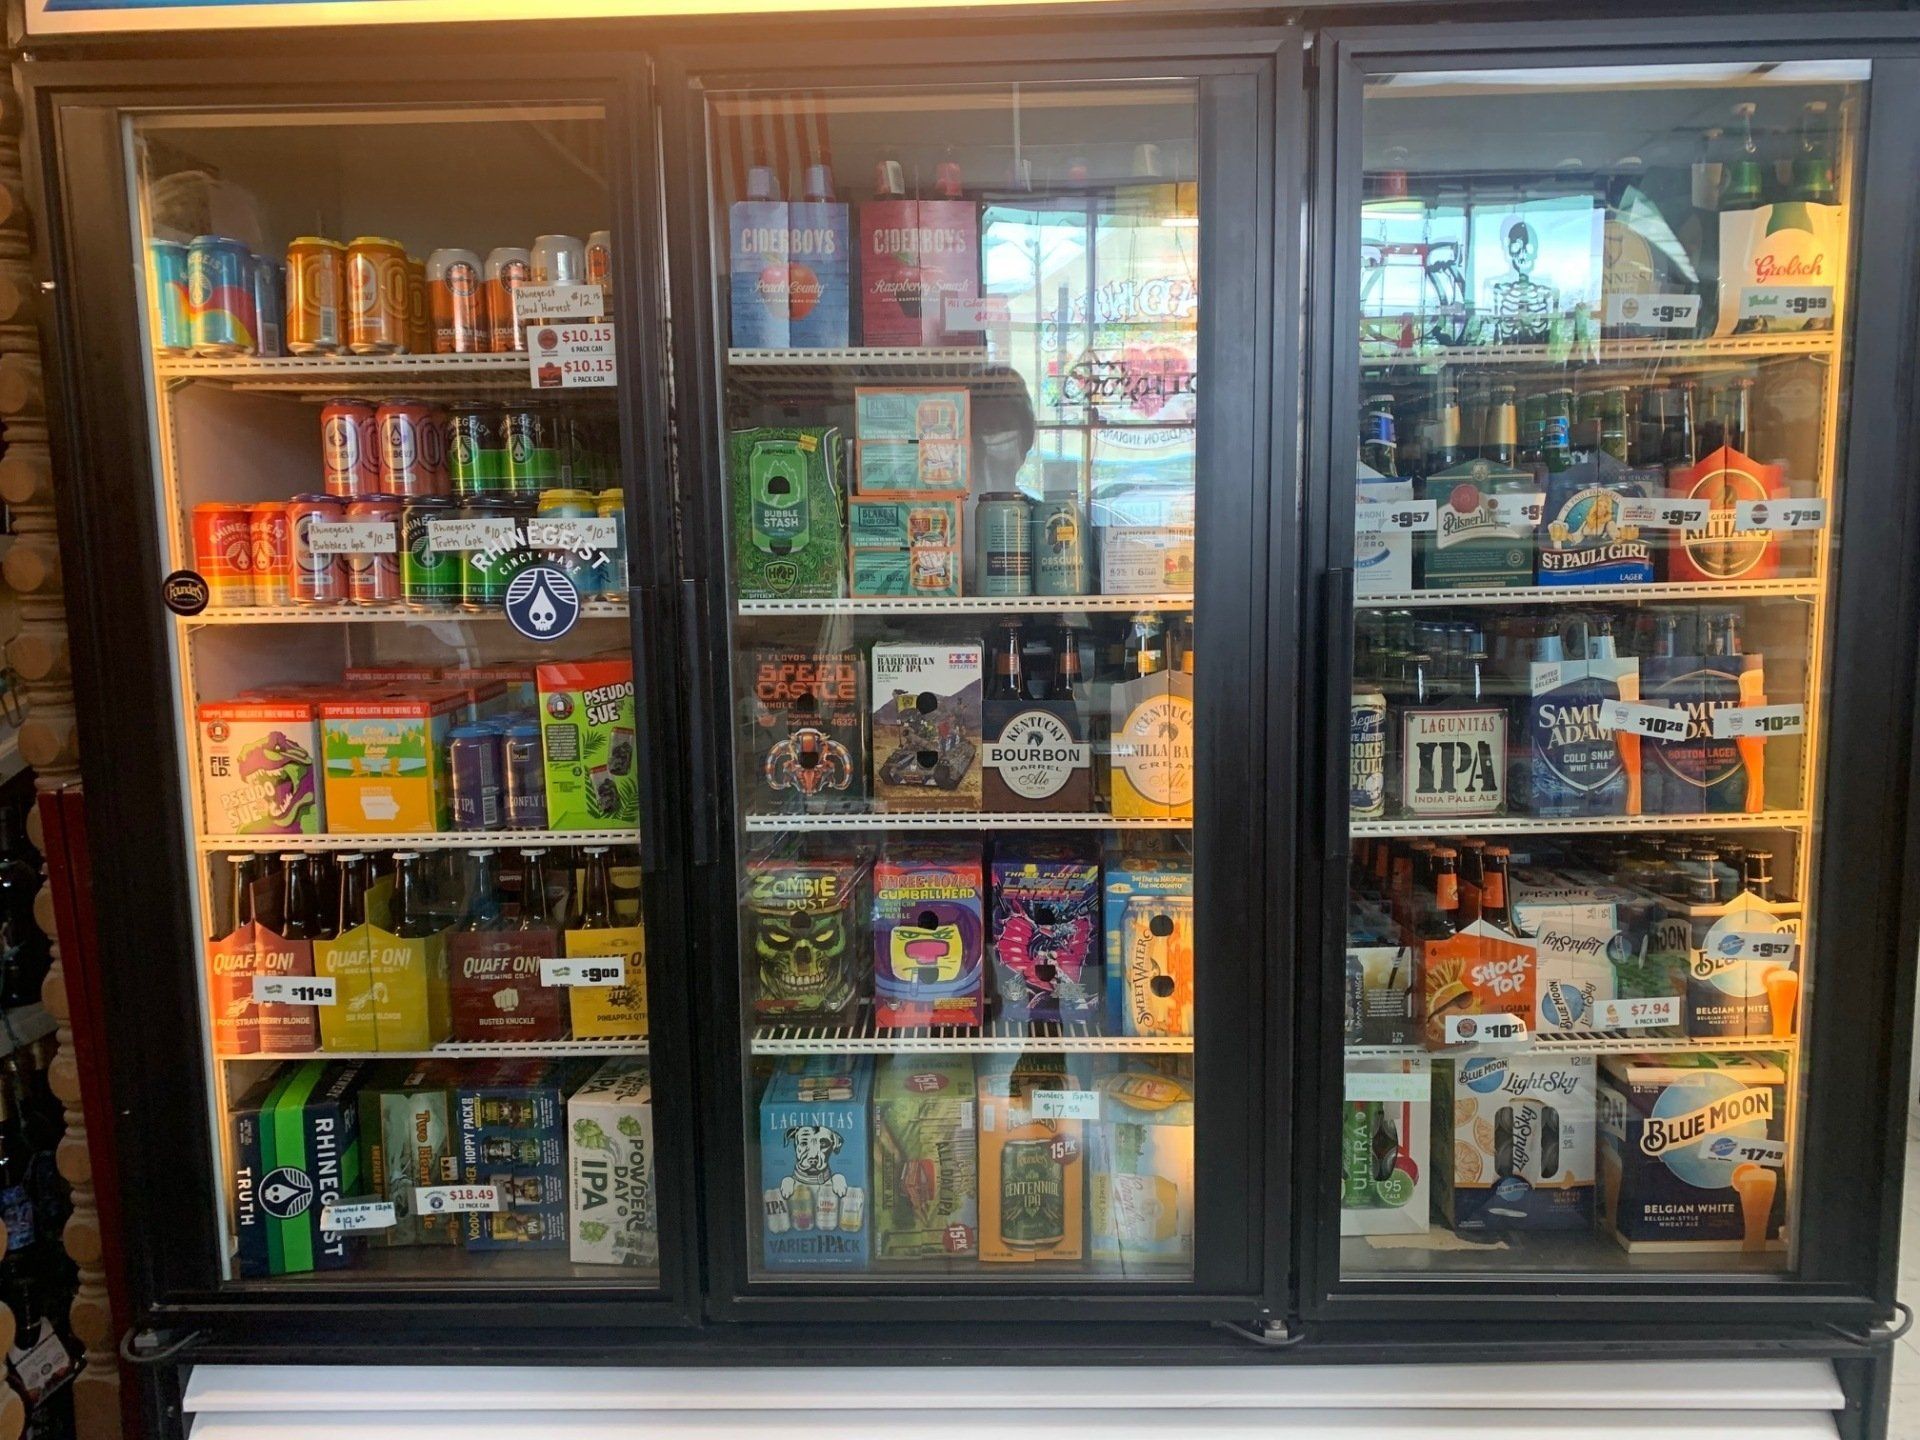 A refrigerator filled with lots of drinks and snacks.